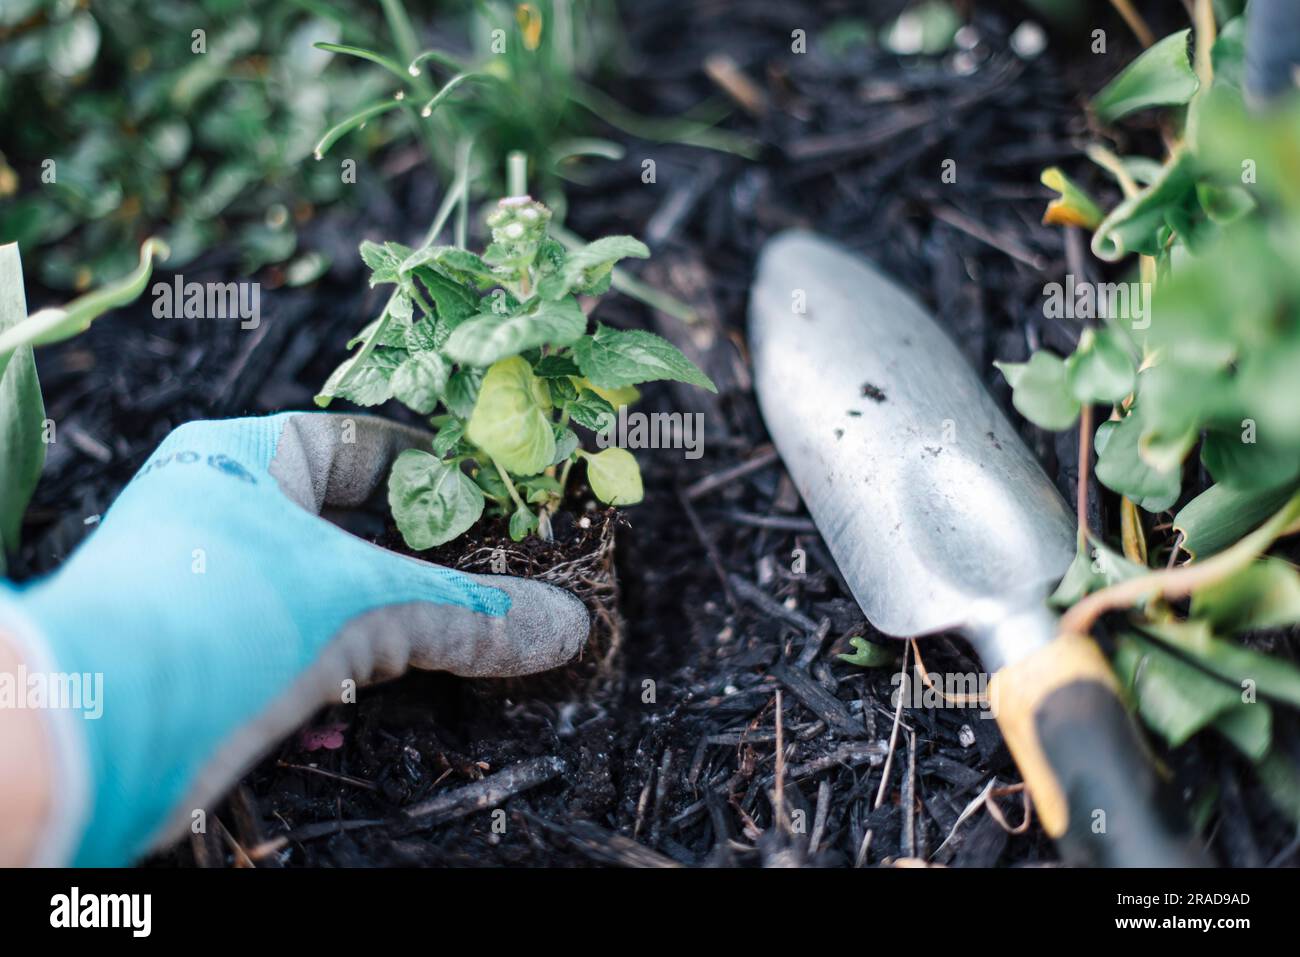 Close up of hand wearing gardening glove planting a new plant. Stock Photo